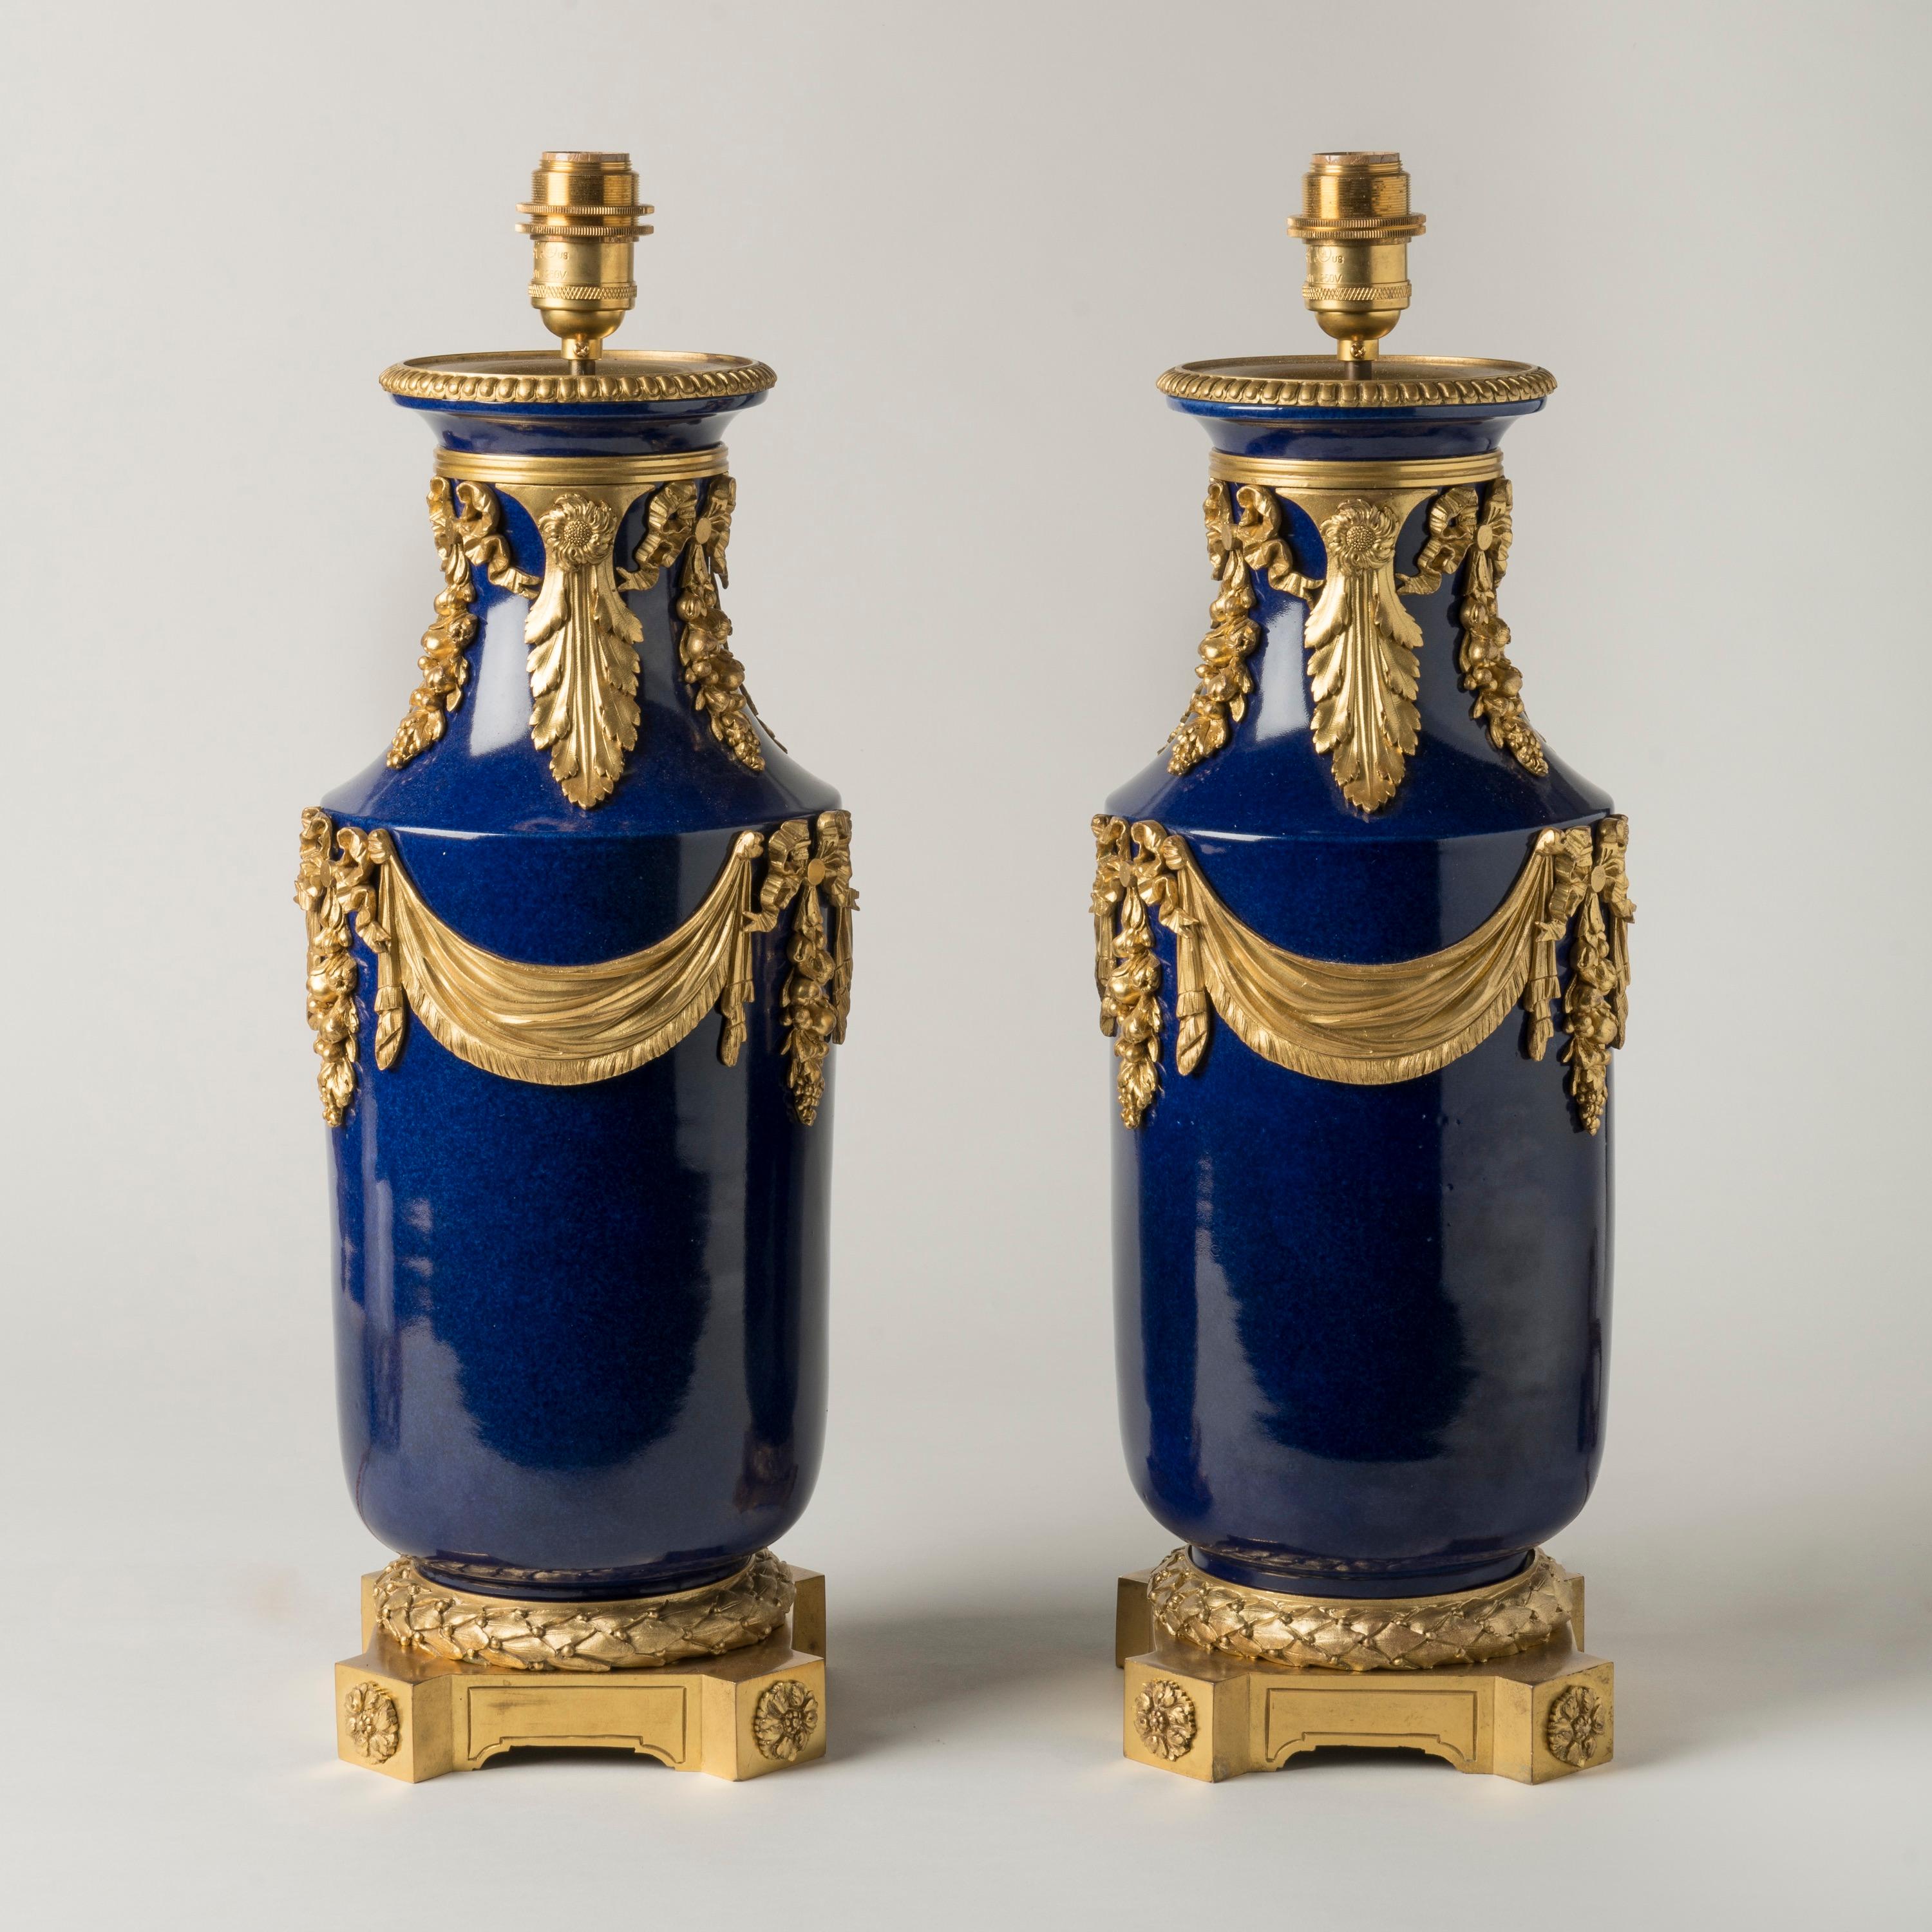 Pair of Large French Blue Porcelain Antique Lamps with Bronze Doré Mounts In Good Condition For Sale In London, GB